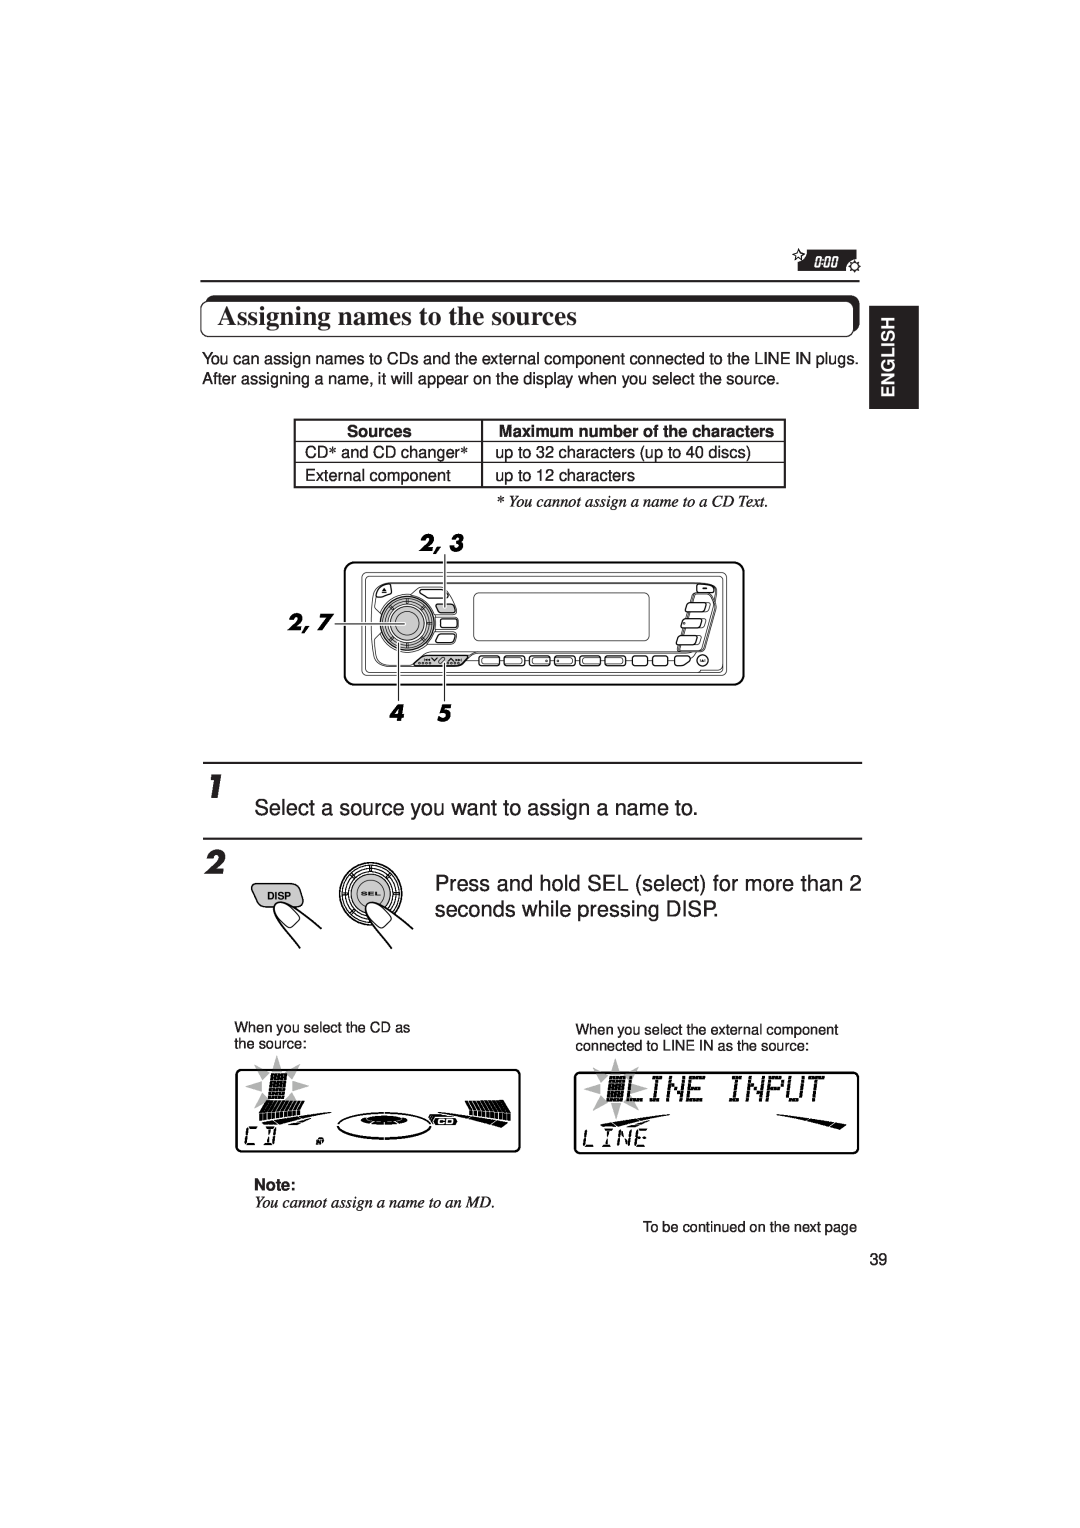 JVC KD-MX2900R manual Assigning names to the sources, English, Sources, Maximum number of the characters 